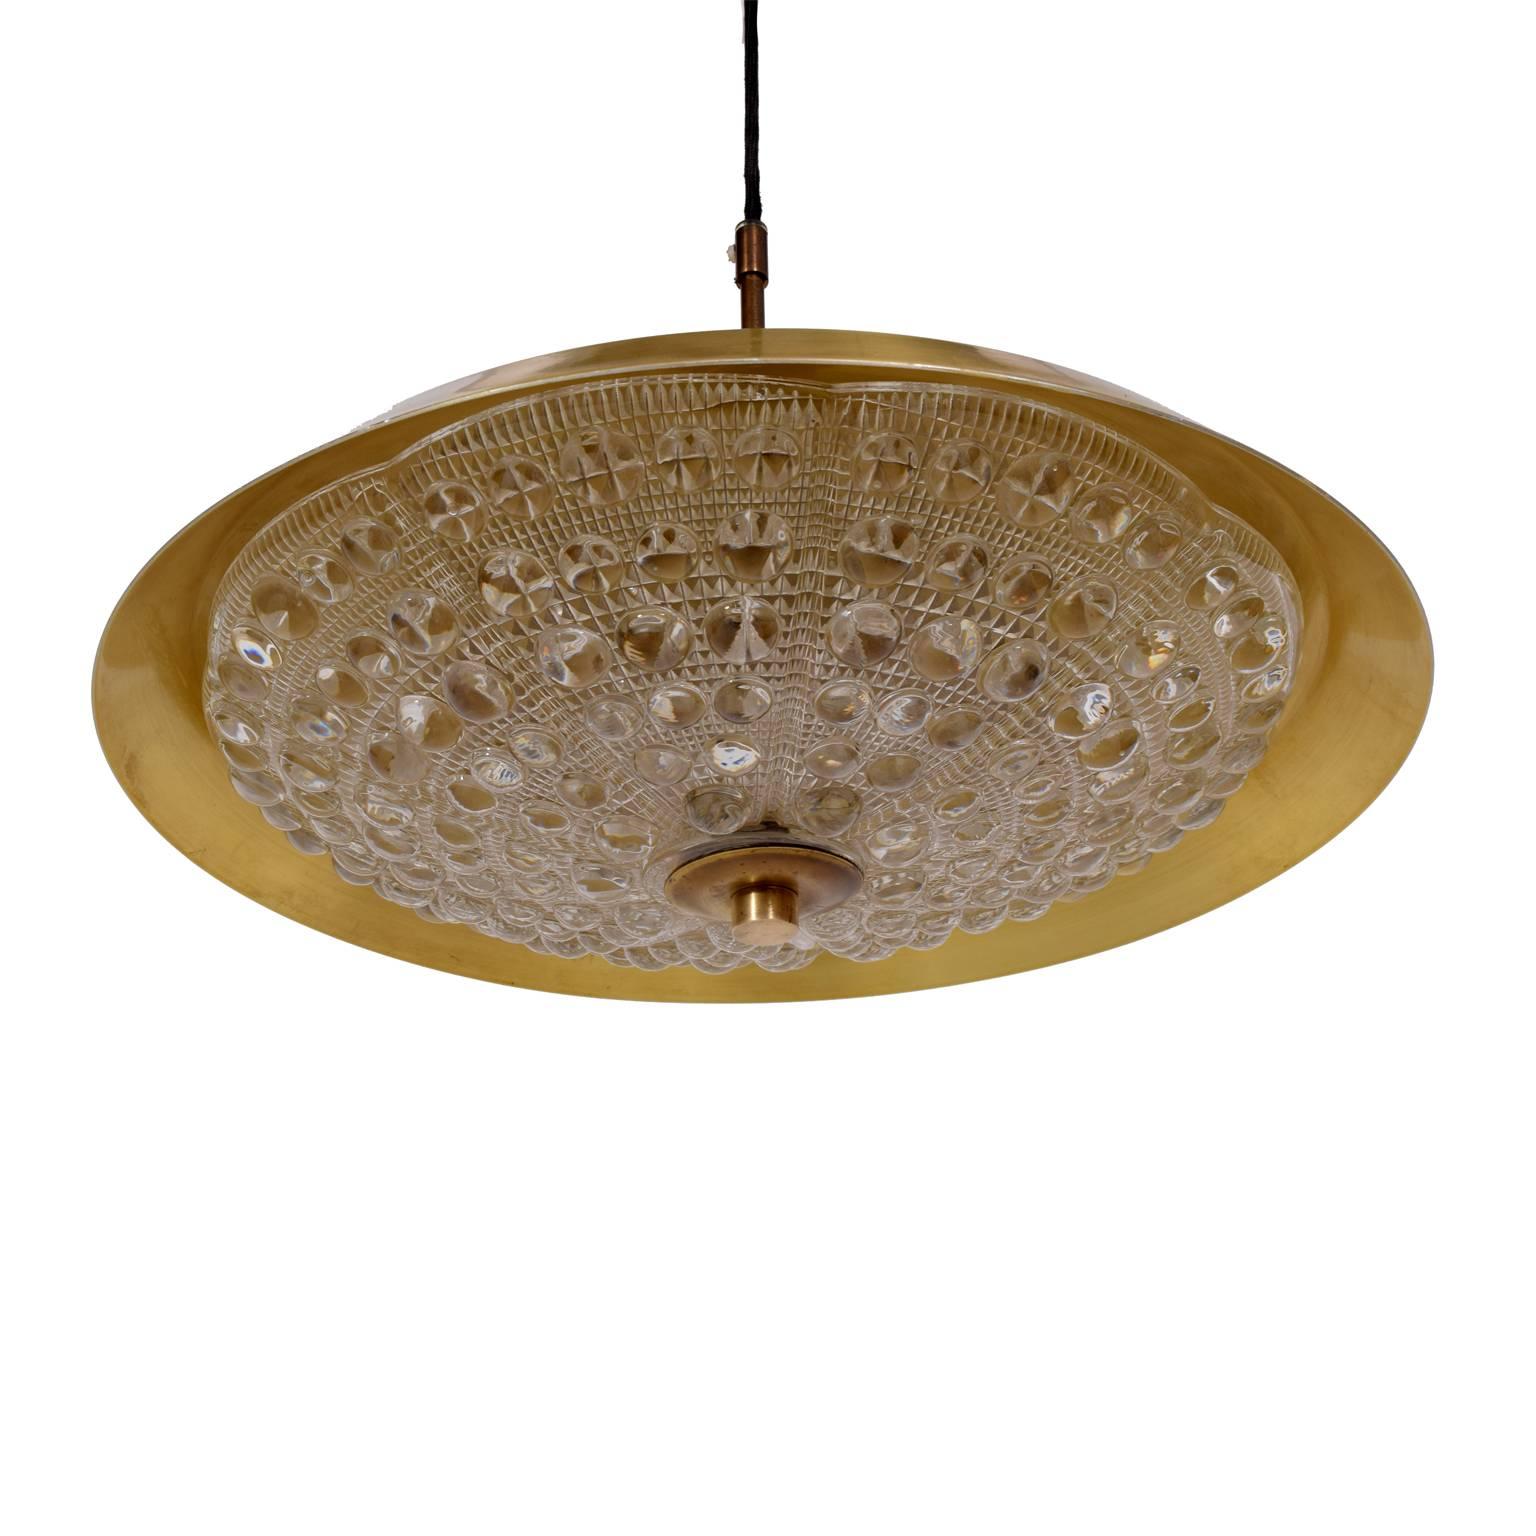 Pendant lamp with metal shade over textured glass inner shade; six sockets for small light bulbs. Retains Lyfa paper label. Total height: 37